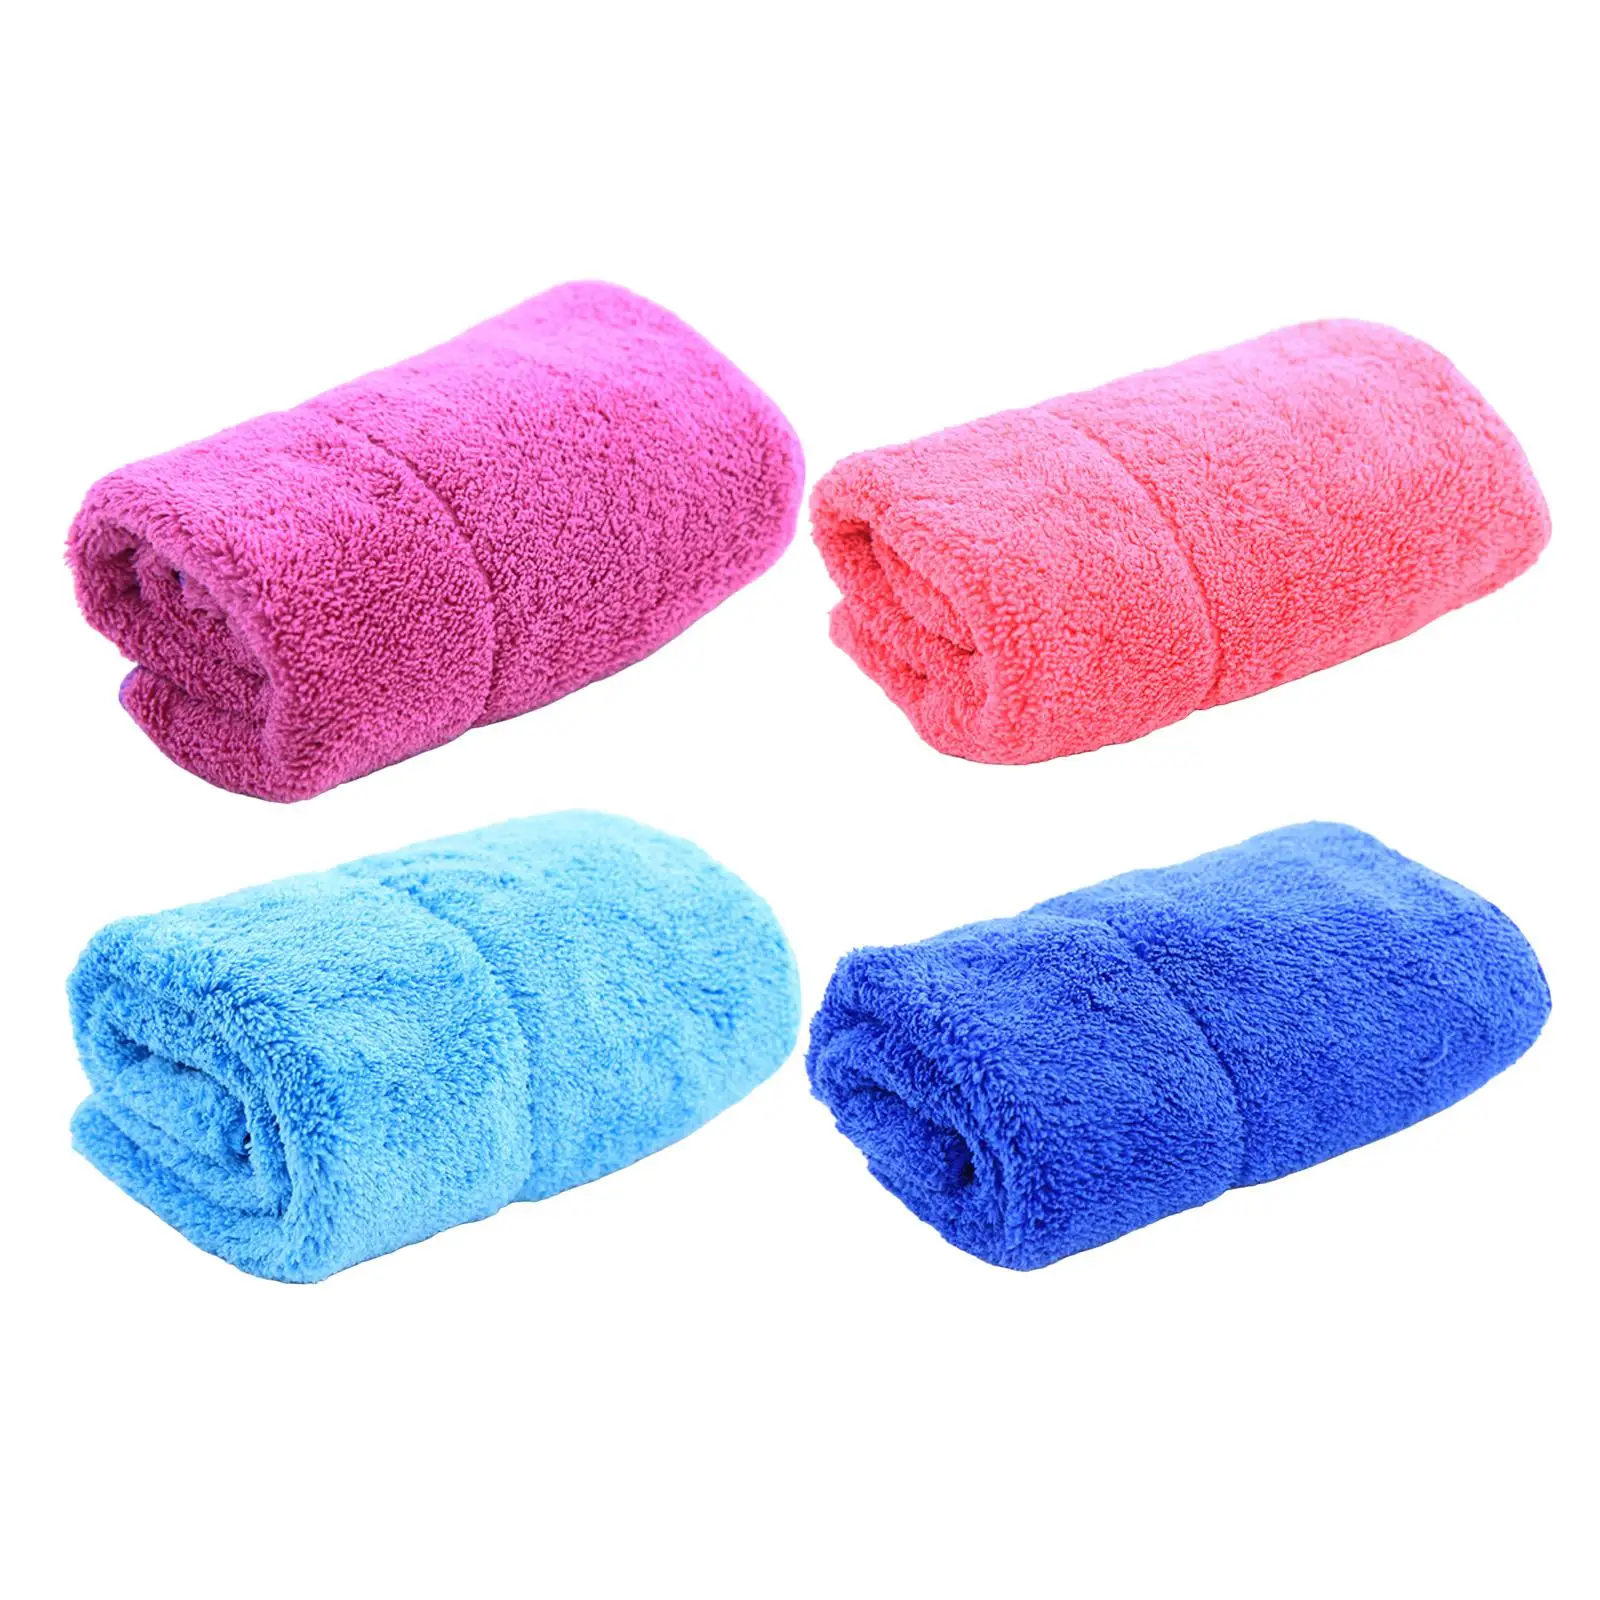 Ice Skate Wipe Cloth Cleaning Washcloths High Absorbent Comfortable for Shoe Hockey Skates Skating Figure Skates Kitchen